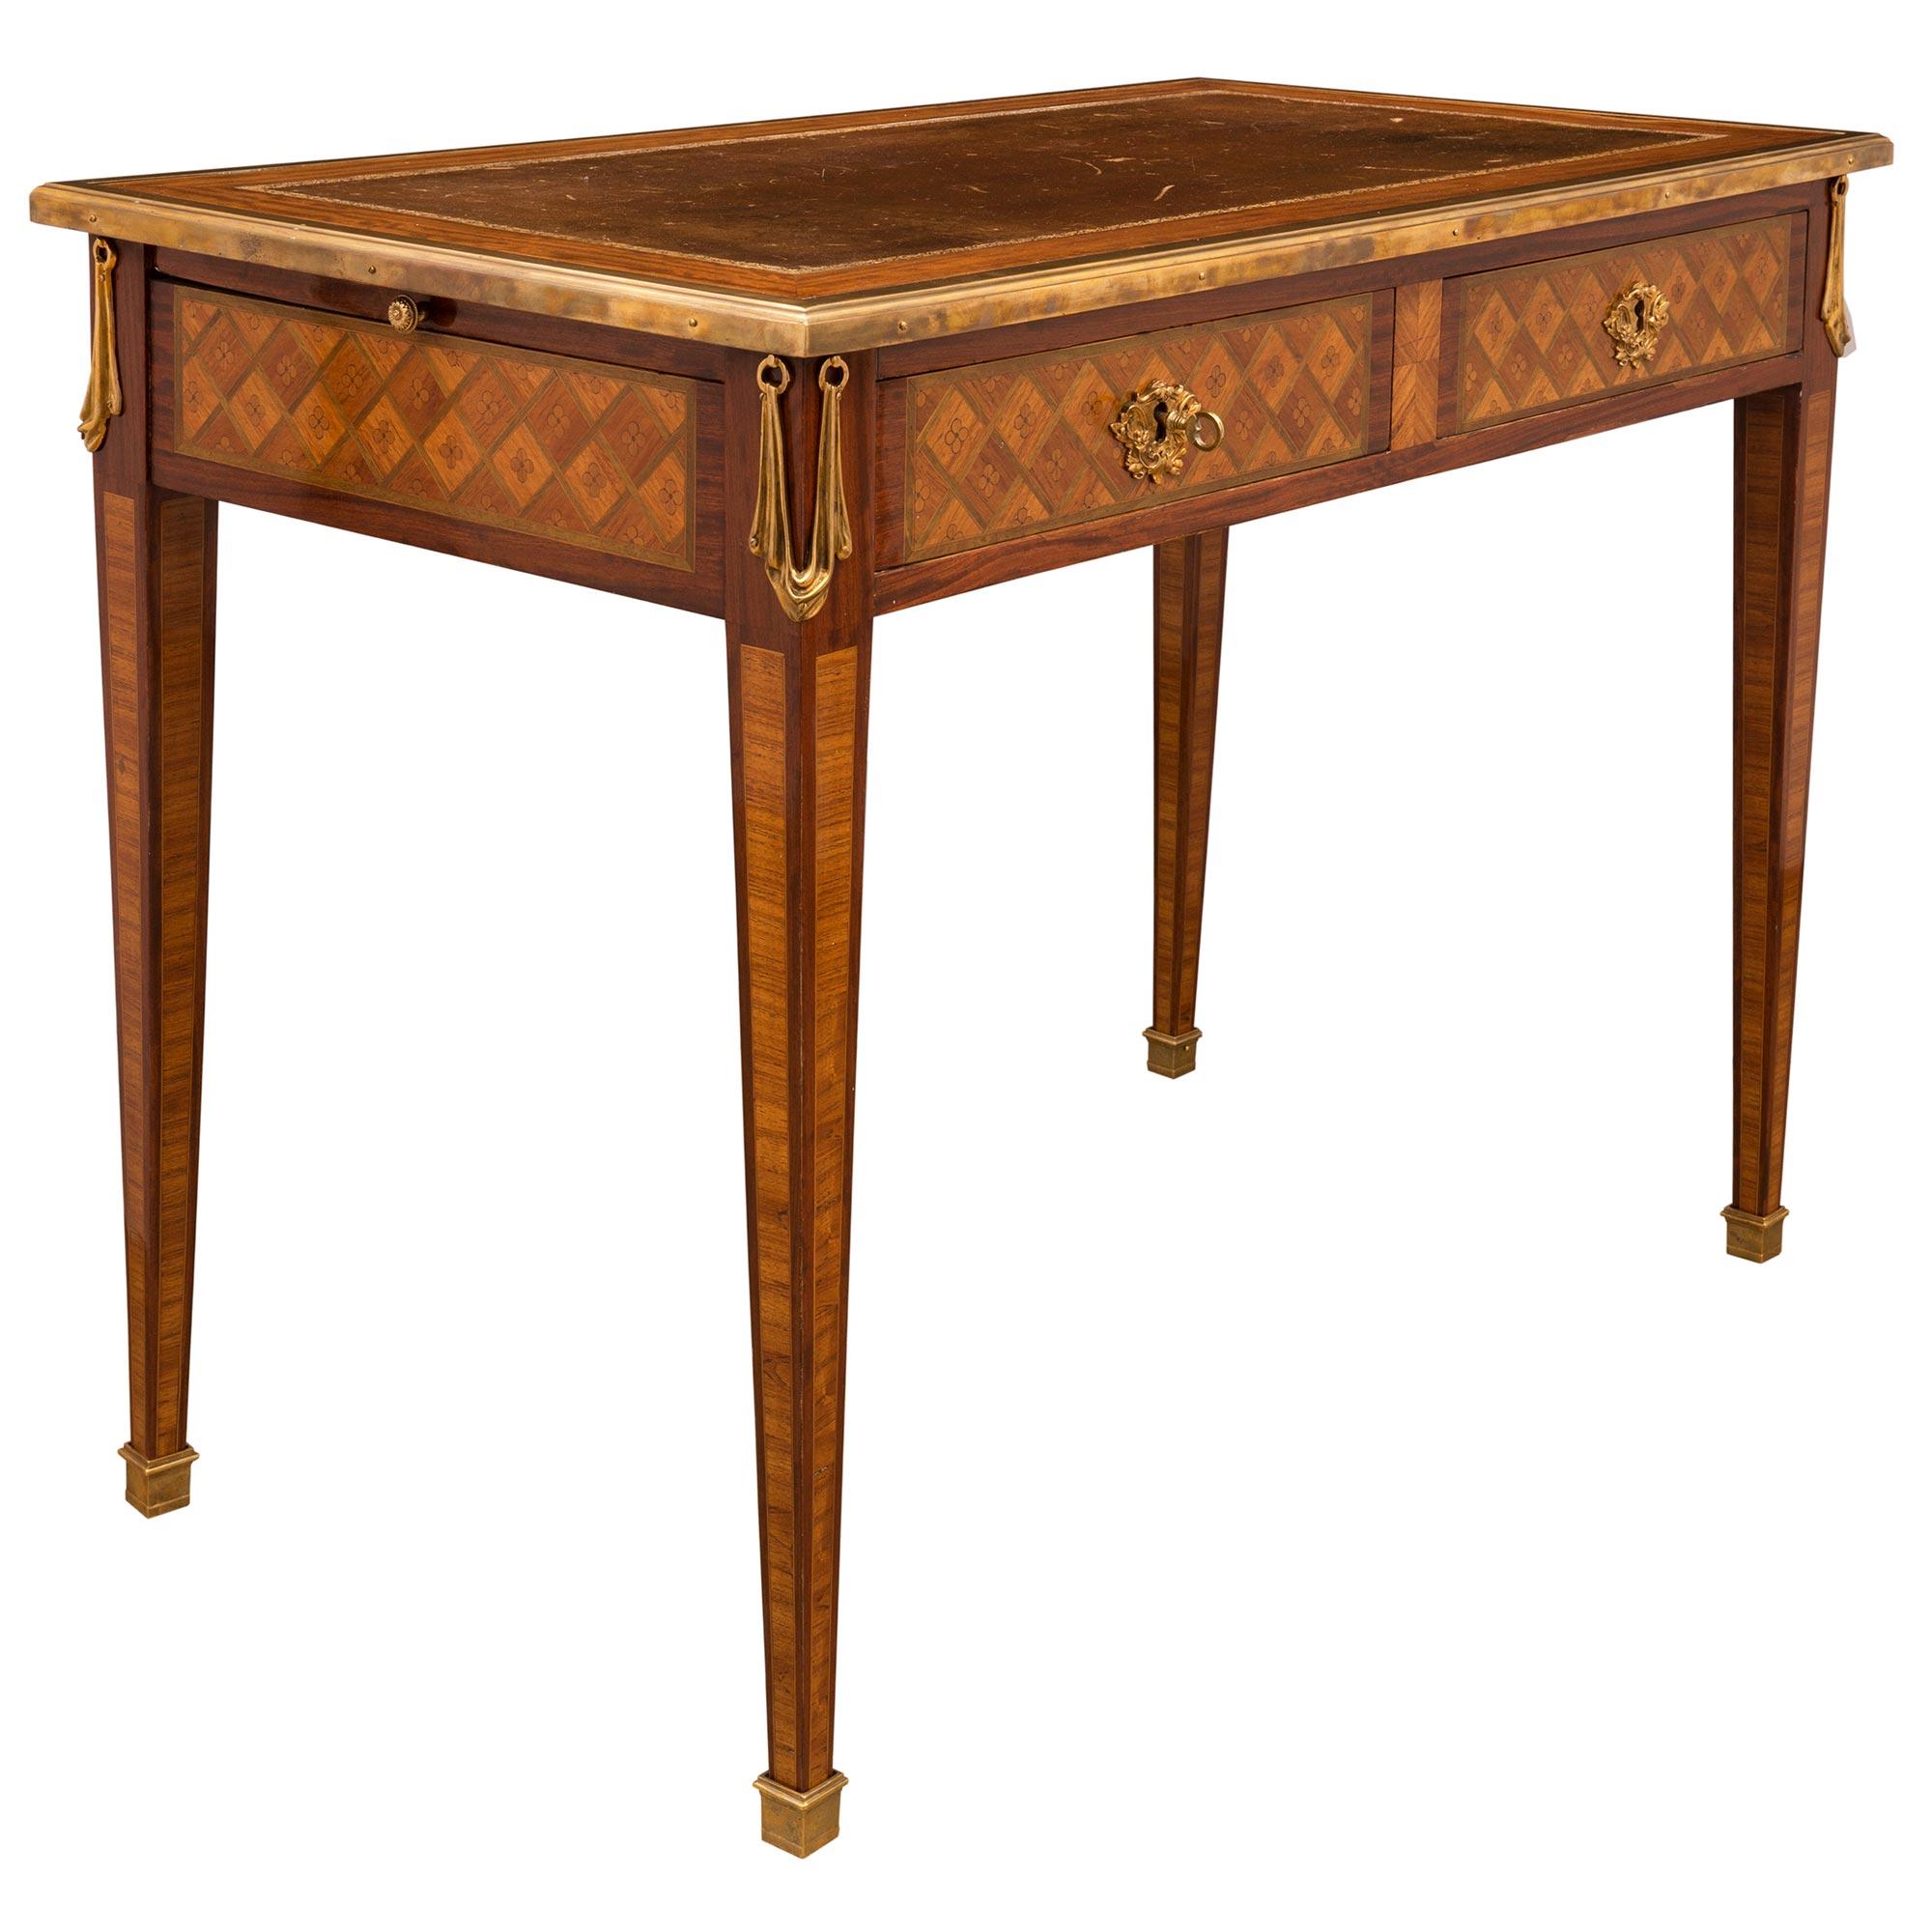 Ormolu French Mid-19th Century Louis XVI Style Tulipwood, Kingwood and Charmwood Desk For Sale